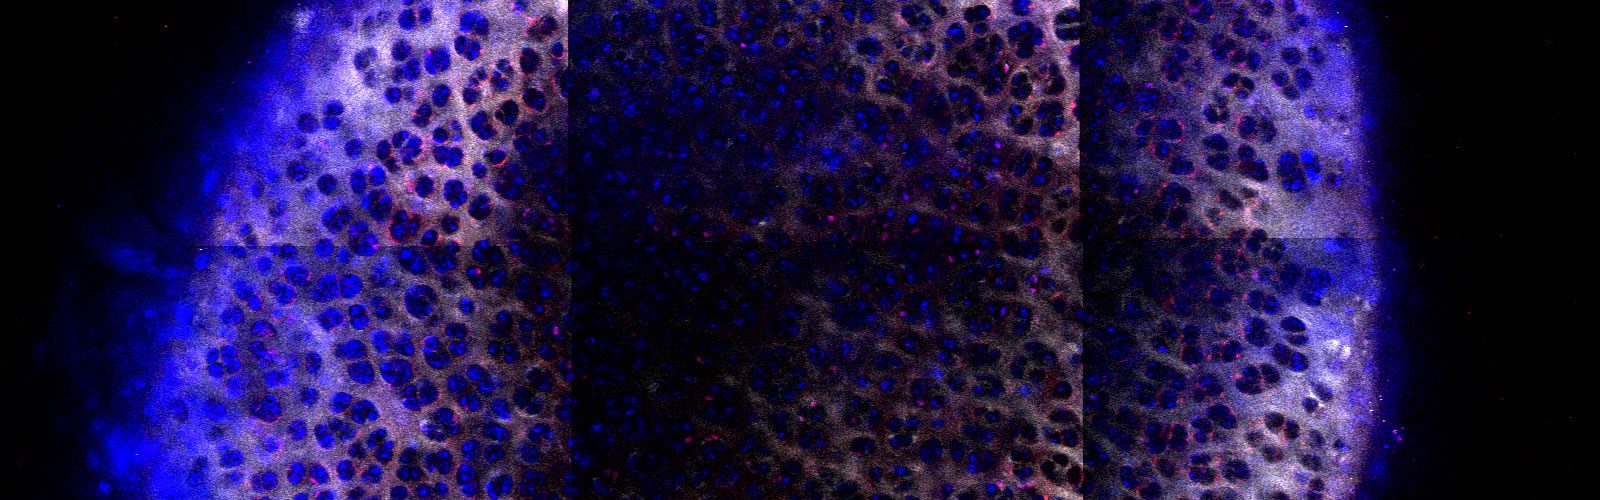 Researchers engineered dendrimers to deliver IGF-1 to cartilage, enhancing treatment for osteoarthritis. Decorative image shows the cartilage in a fluorescent micrograph. Fluorescently labeled dendrimer in blue is shown to penetrate the cartilage.